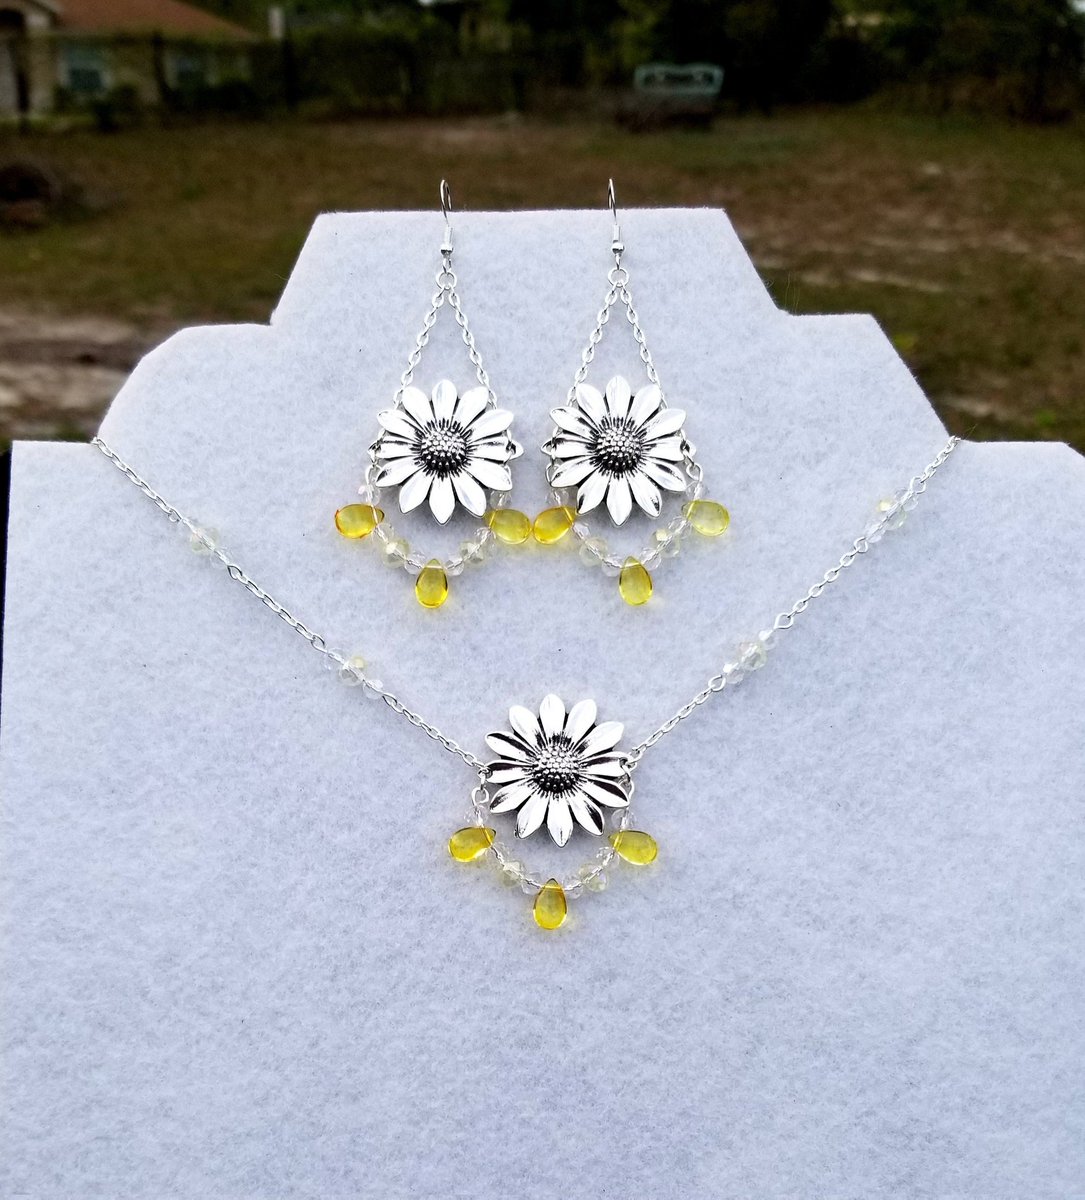 #jewelry #necklace #necklaces #earrings #jewelryset #sunflowers #Sunflower #daisies #daisyjewelry #flowerearrings #handmade #handmadejewelry #handmadegift #giftsforher #giftideas #mothersdaygifts 

simplychicbyangela.etsy.com/listing/168326…